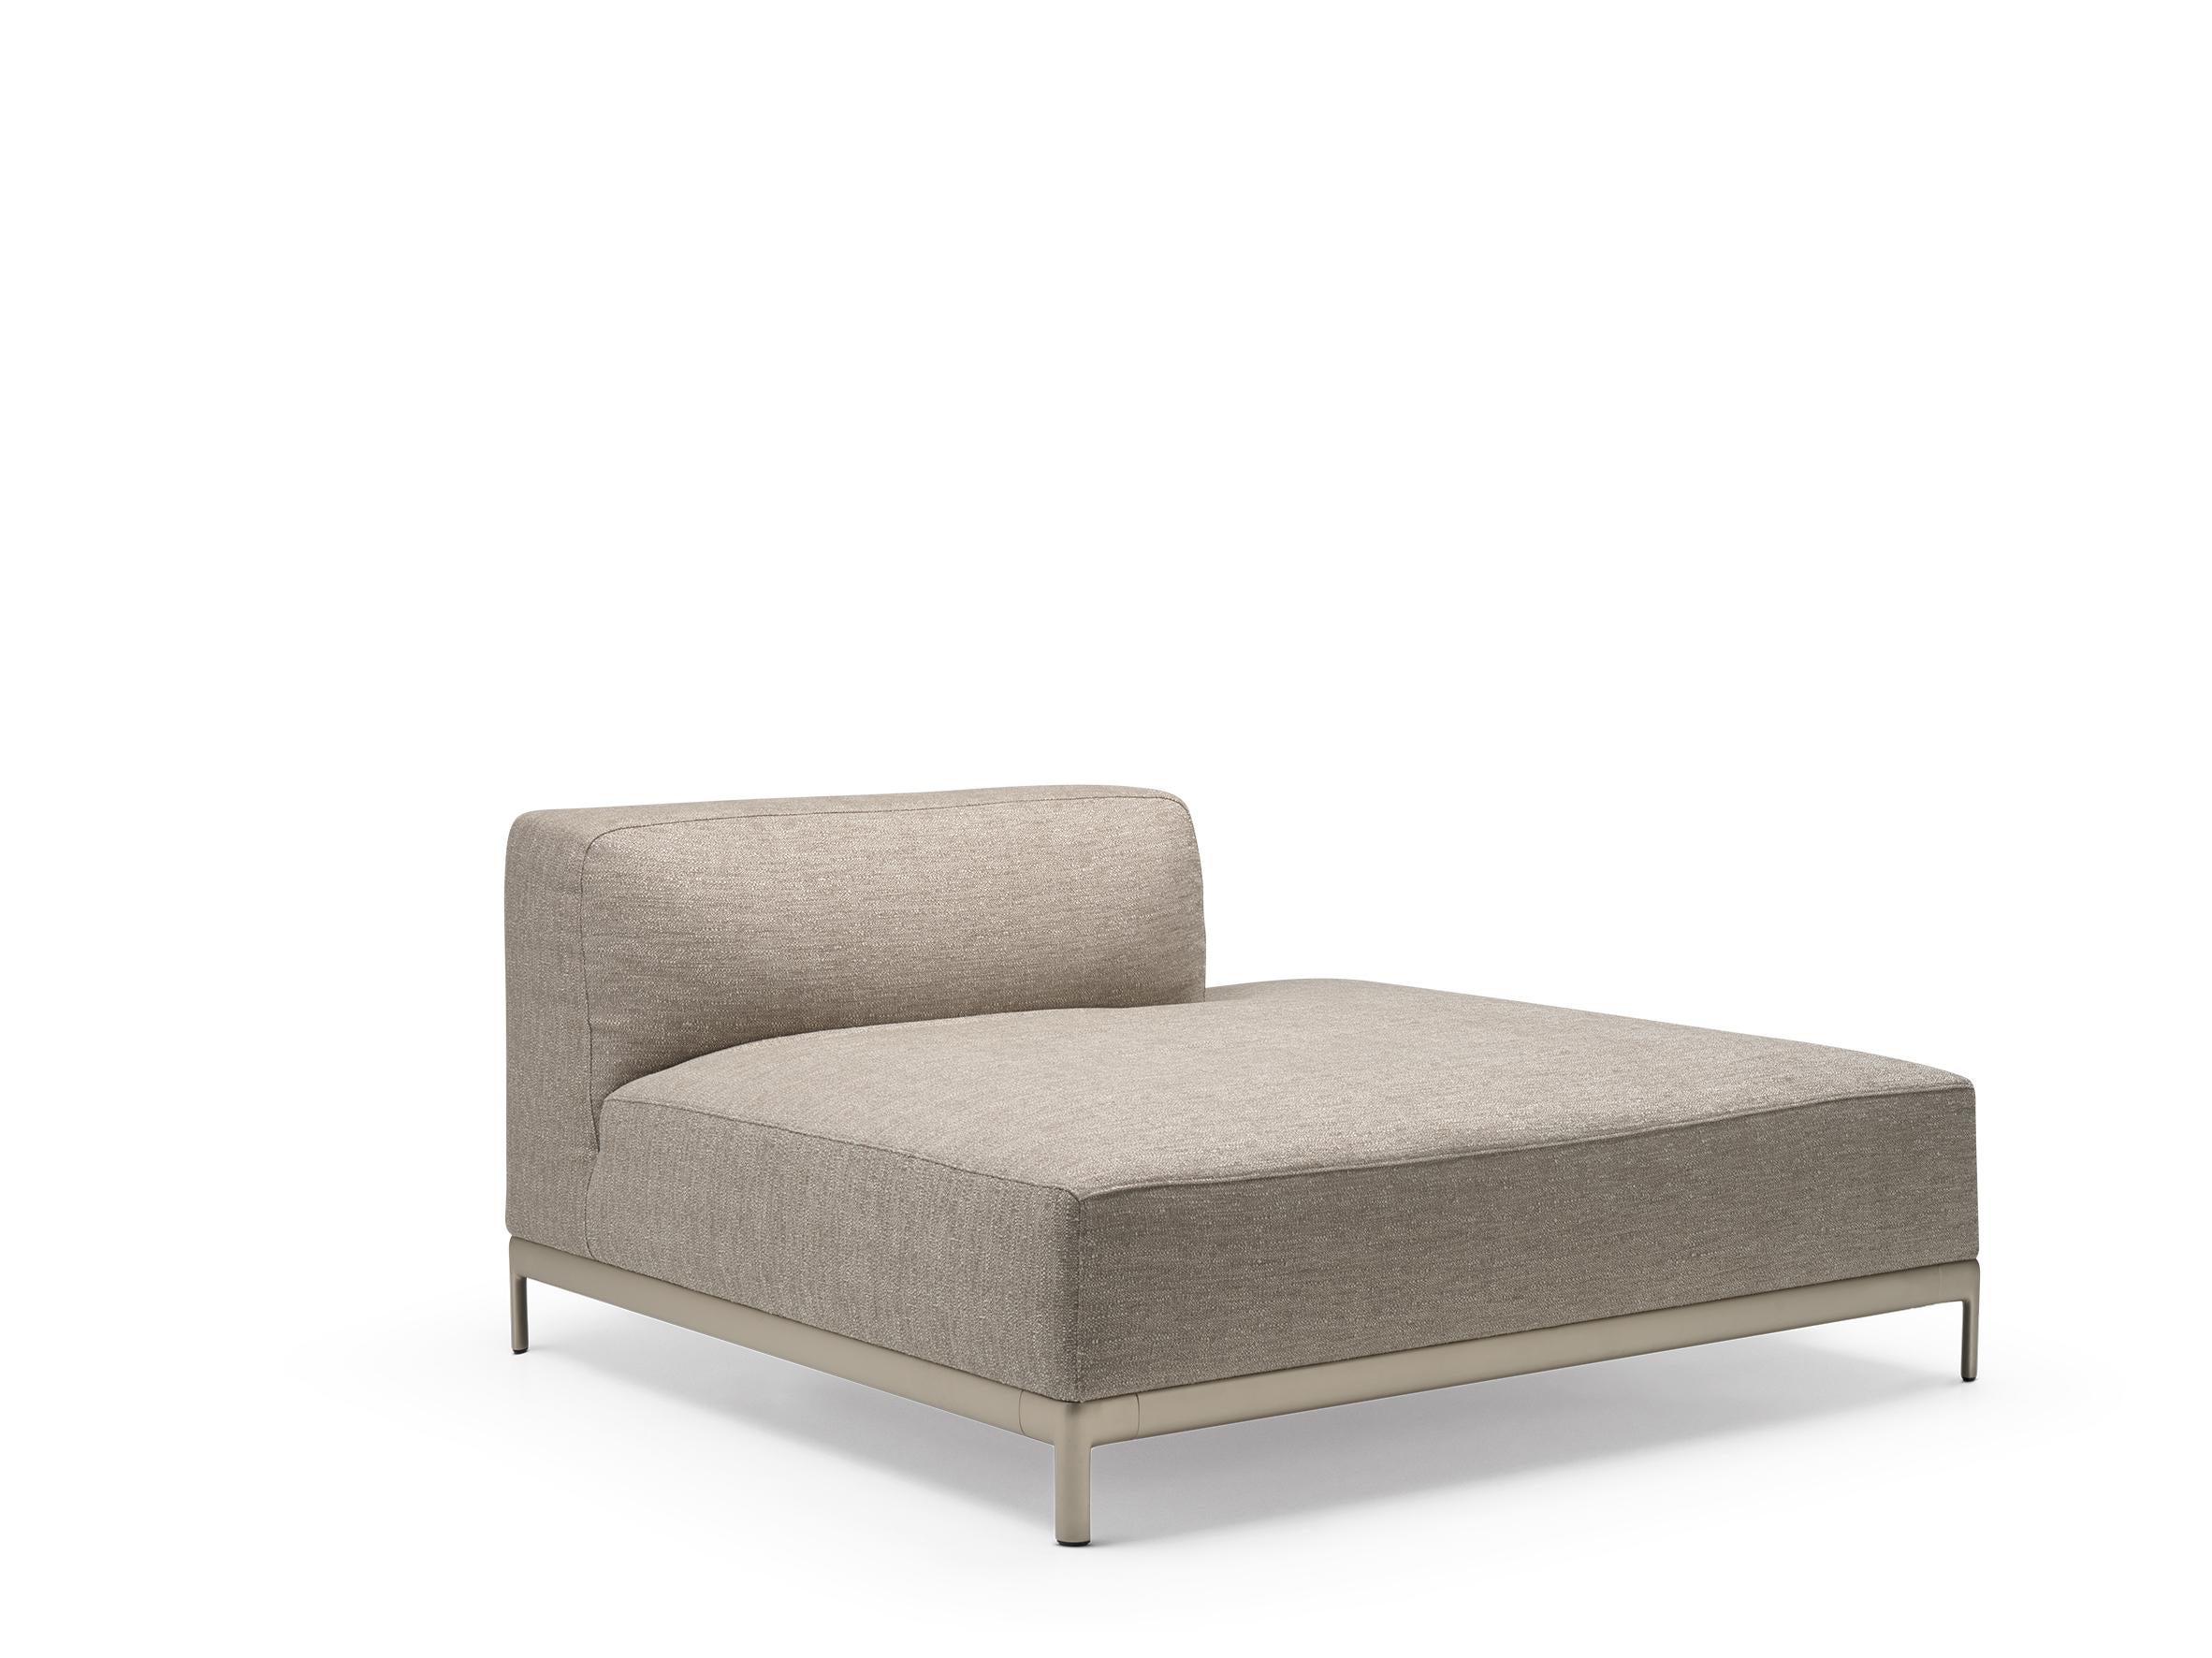 Alias P45 AluZen Soft Ending Sofa in Brown Upholstery & Anodized Gold Frame by Ludovica+Roberto Palomba

Modular closing element with structure in lacquered or polished aluminium.Seat and back with removable cover in fabric or leather.Available in